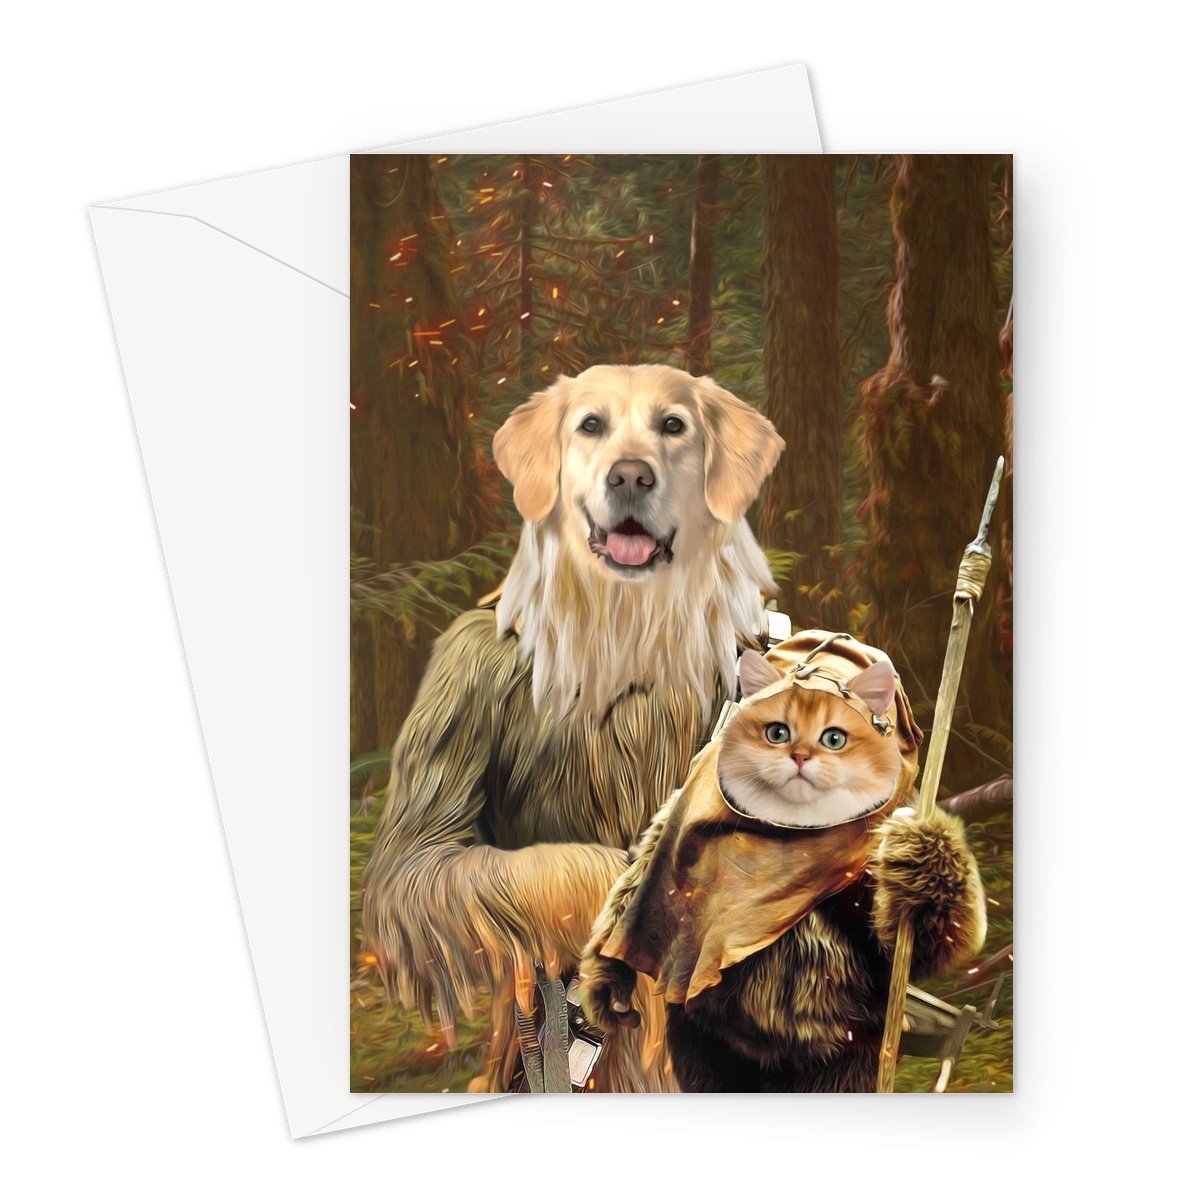 Pawbecca & Ewok (Star Wars Inspired): Custom Pet Greeting Card - Paw & Glory - paw and glory, dog drawing from photo, dog portrait images, dog portraits admiral, aristocrat dog painting, cat picture painting, dog astronaut photo, pet portraits